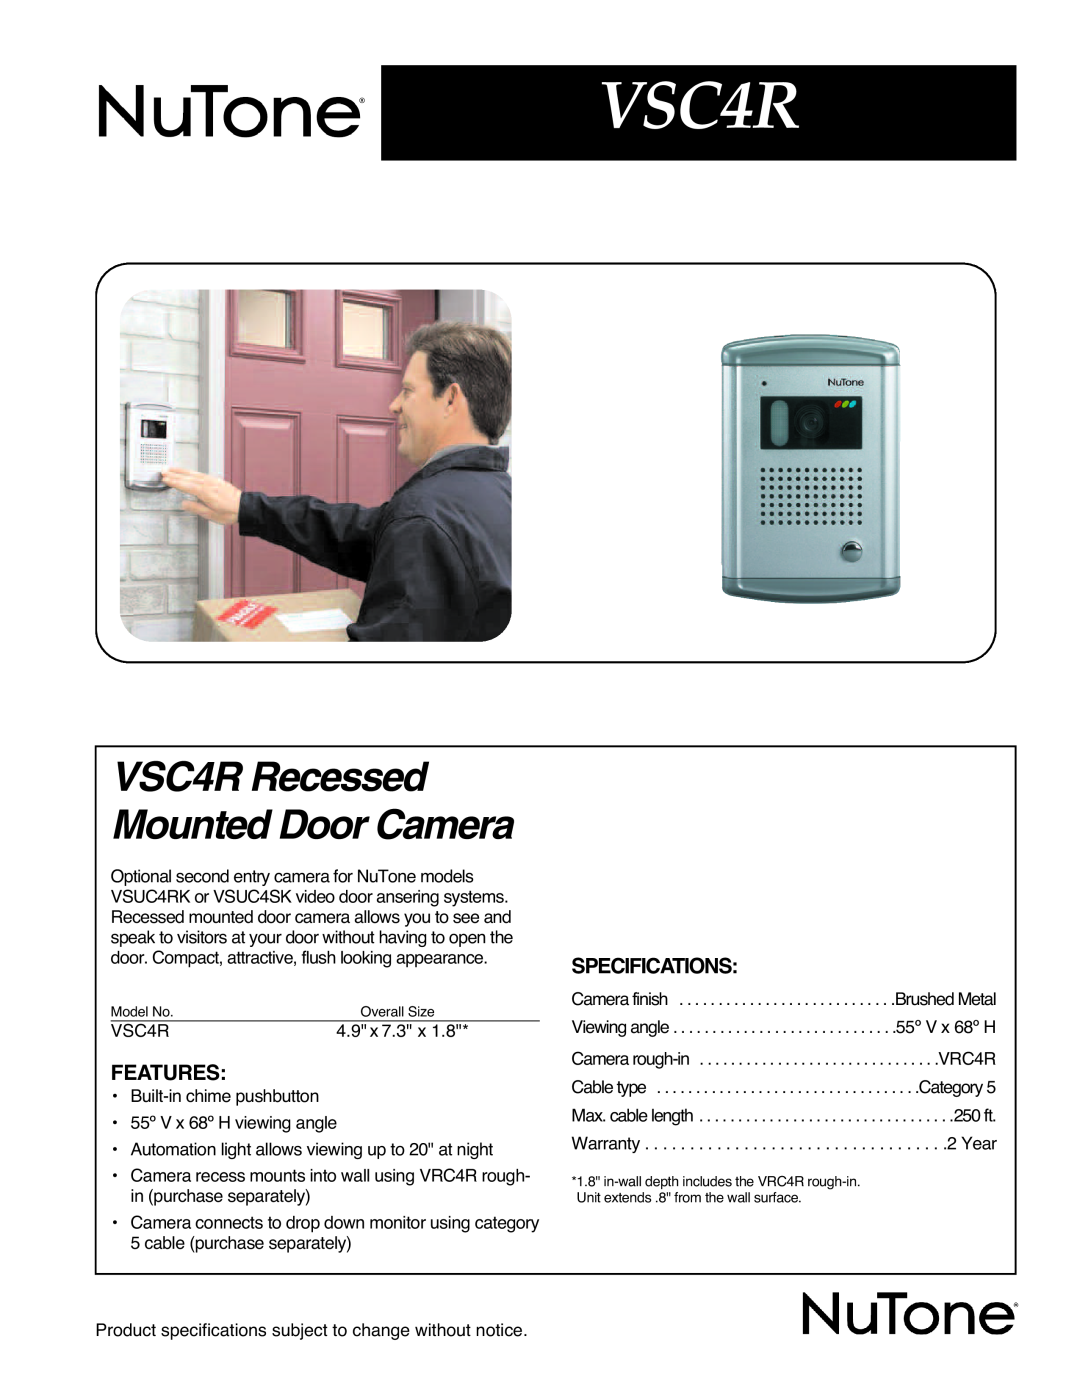 NuTone specifications VSC4R Recessed Mounted Door Camera, Features, Specifications 